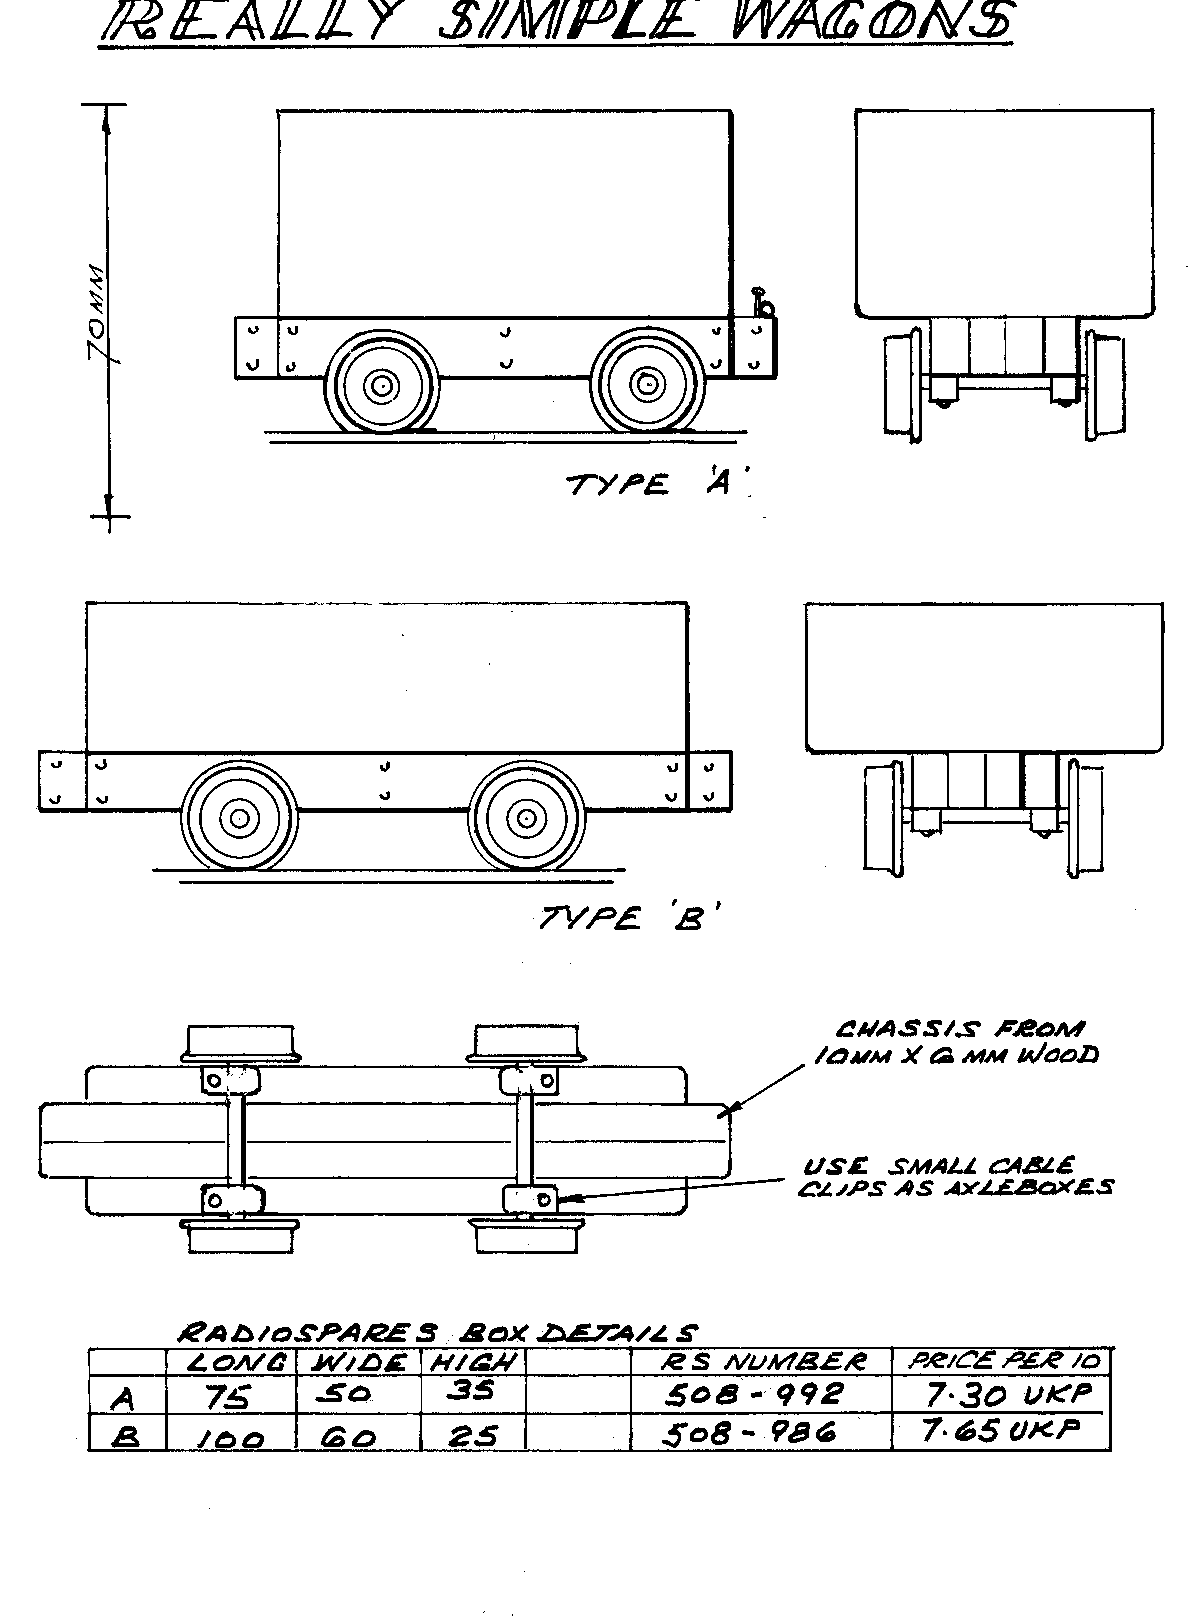 Drawings of simple wagons